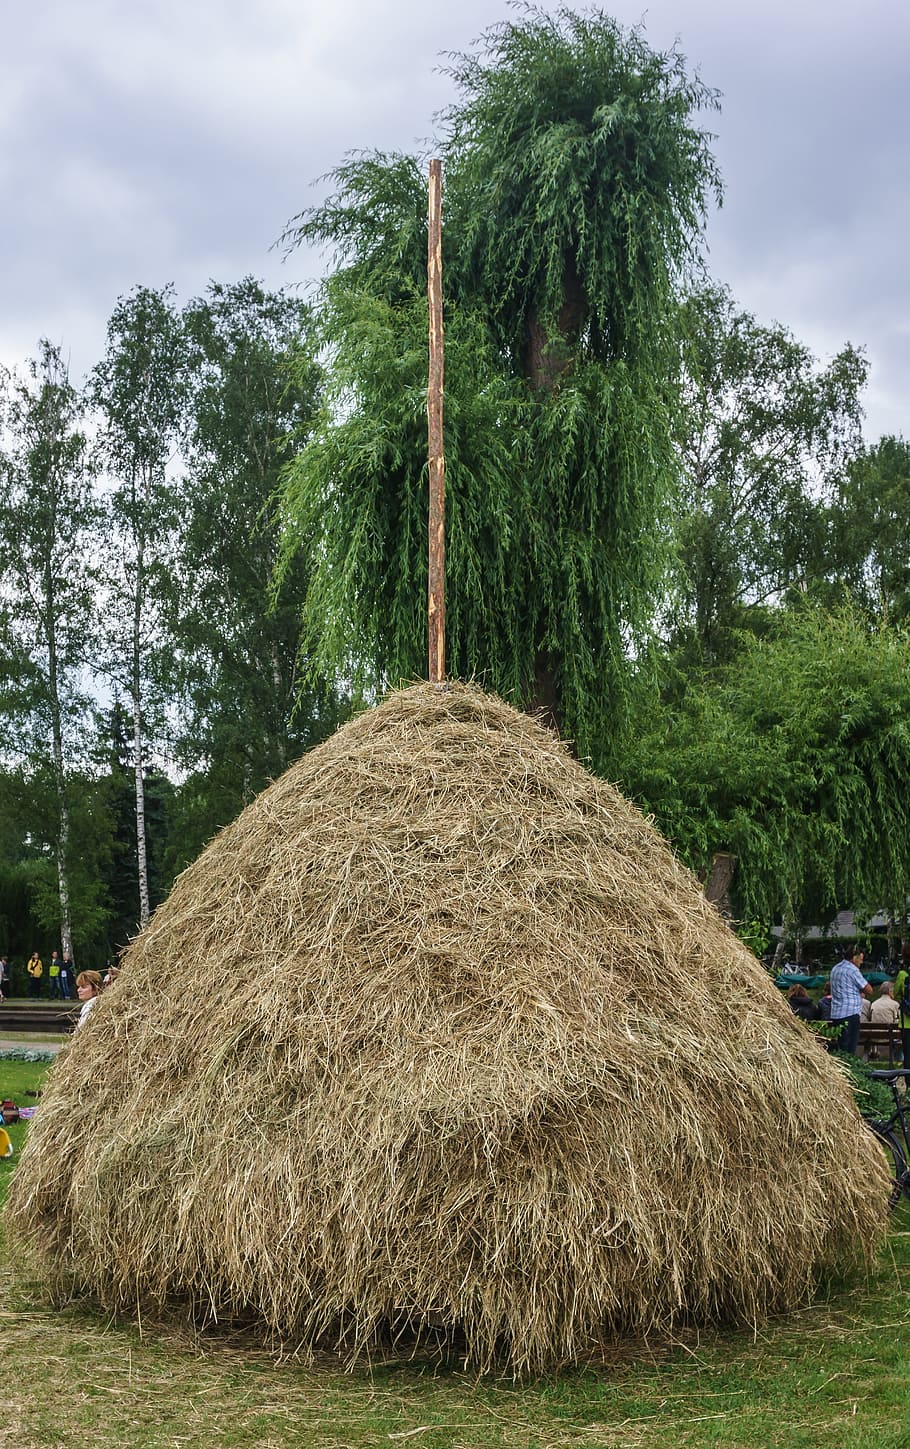 hay, haystack, agriculture, nature, pile, feed, animal husbandry, country life, germany, outdoor